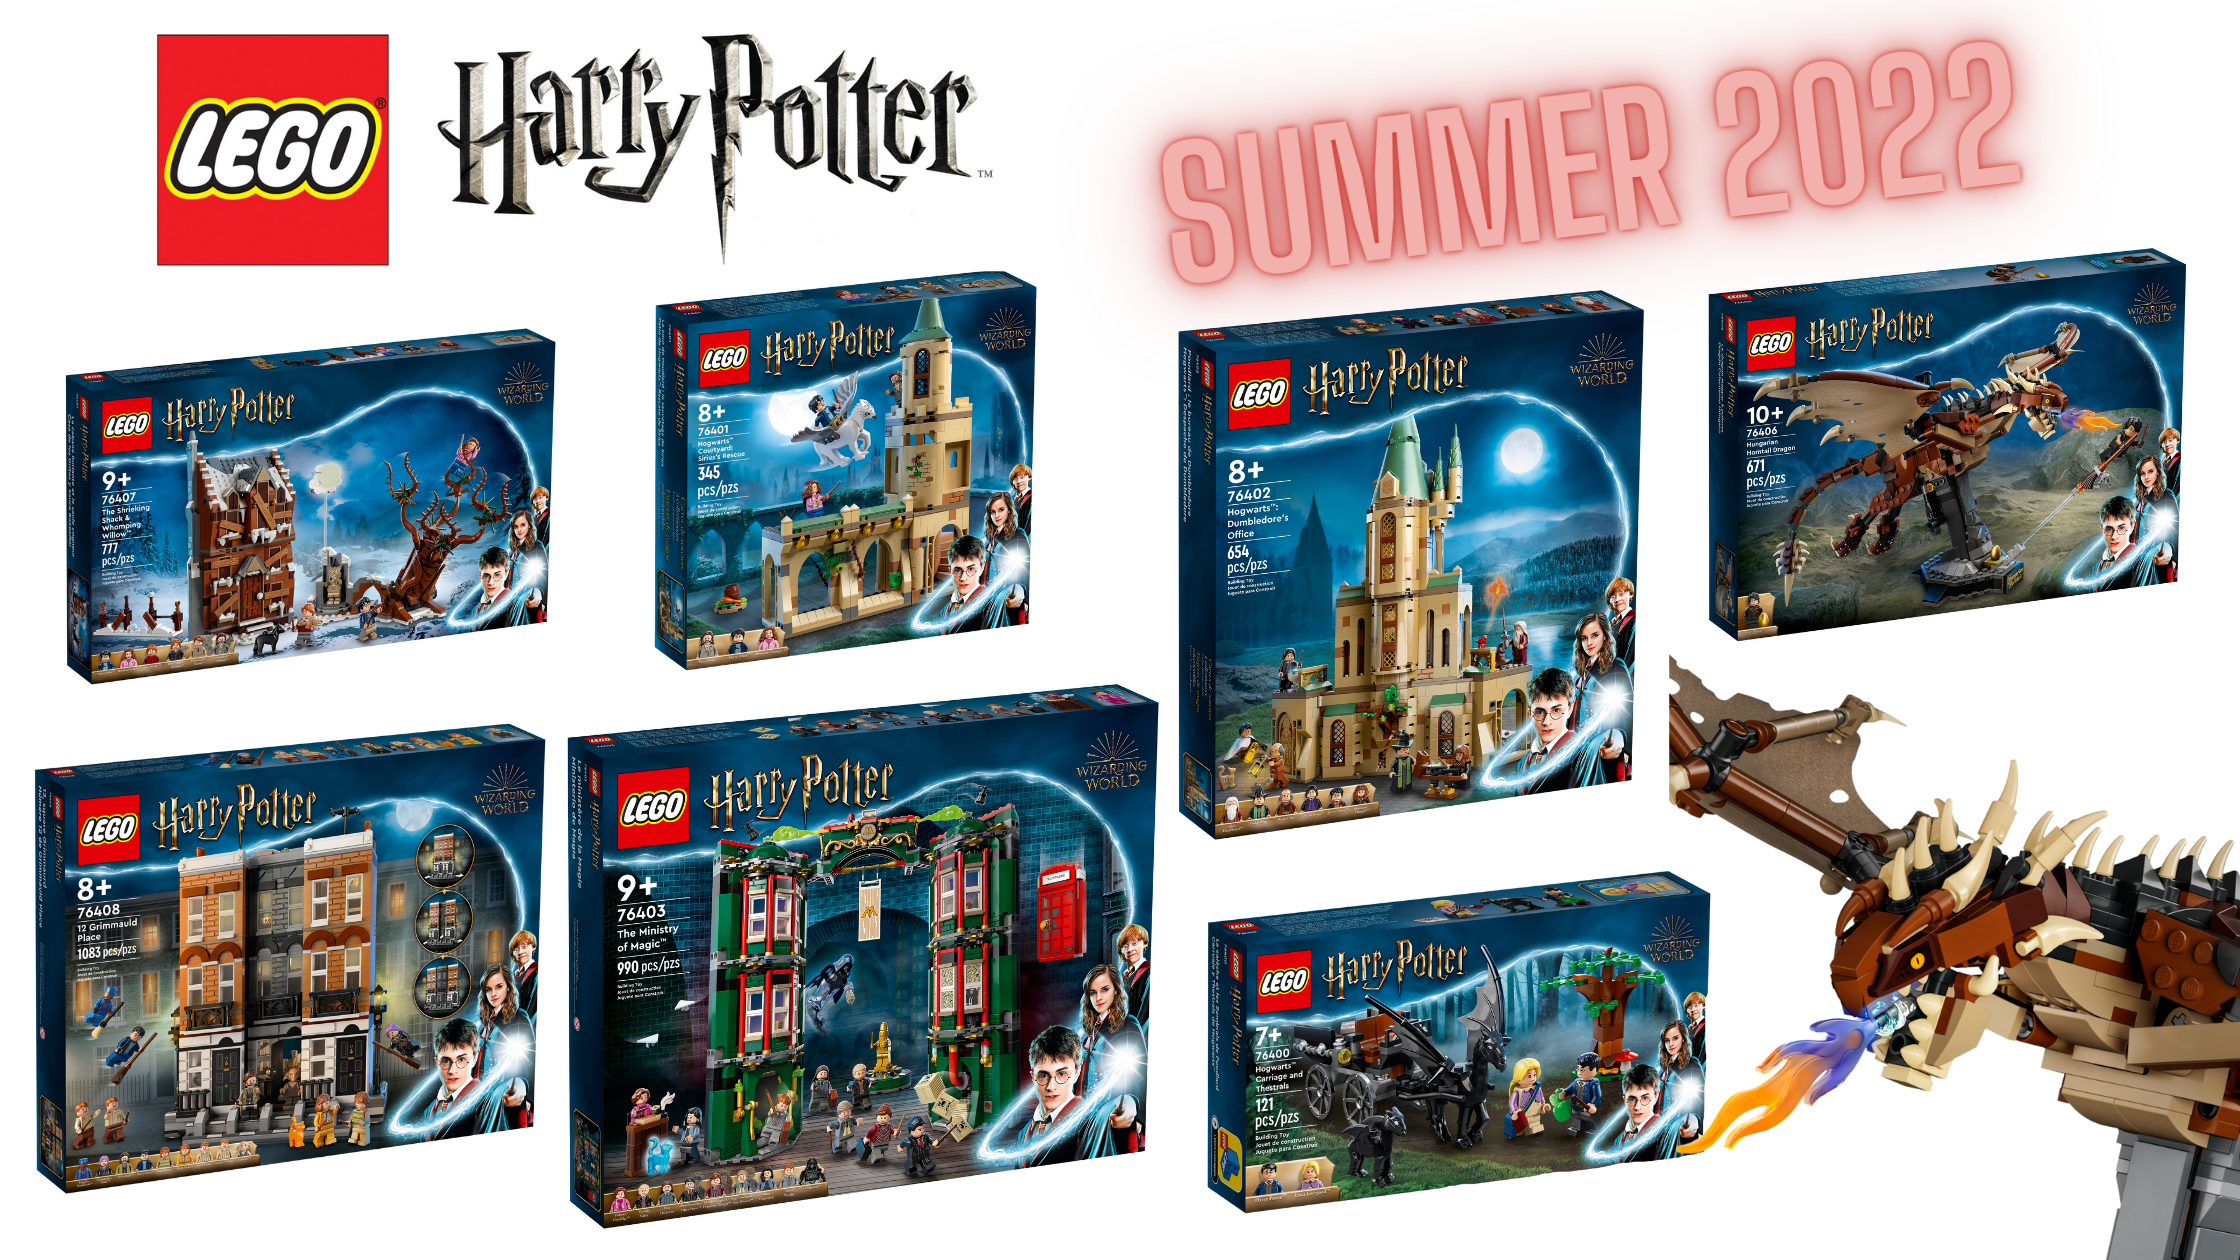 Guide all the new Summer 2022 LEGO Harry Potter Sets - Jay's Brick Blog